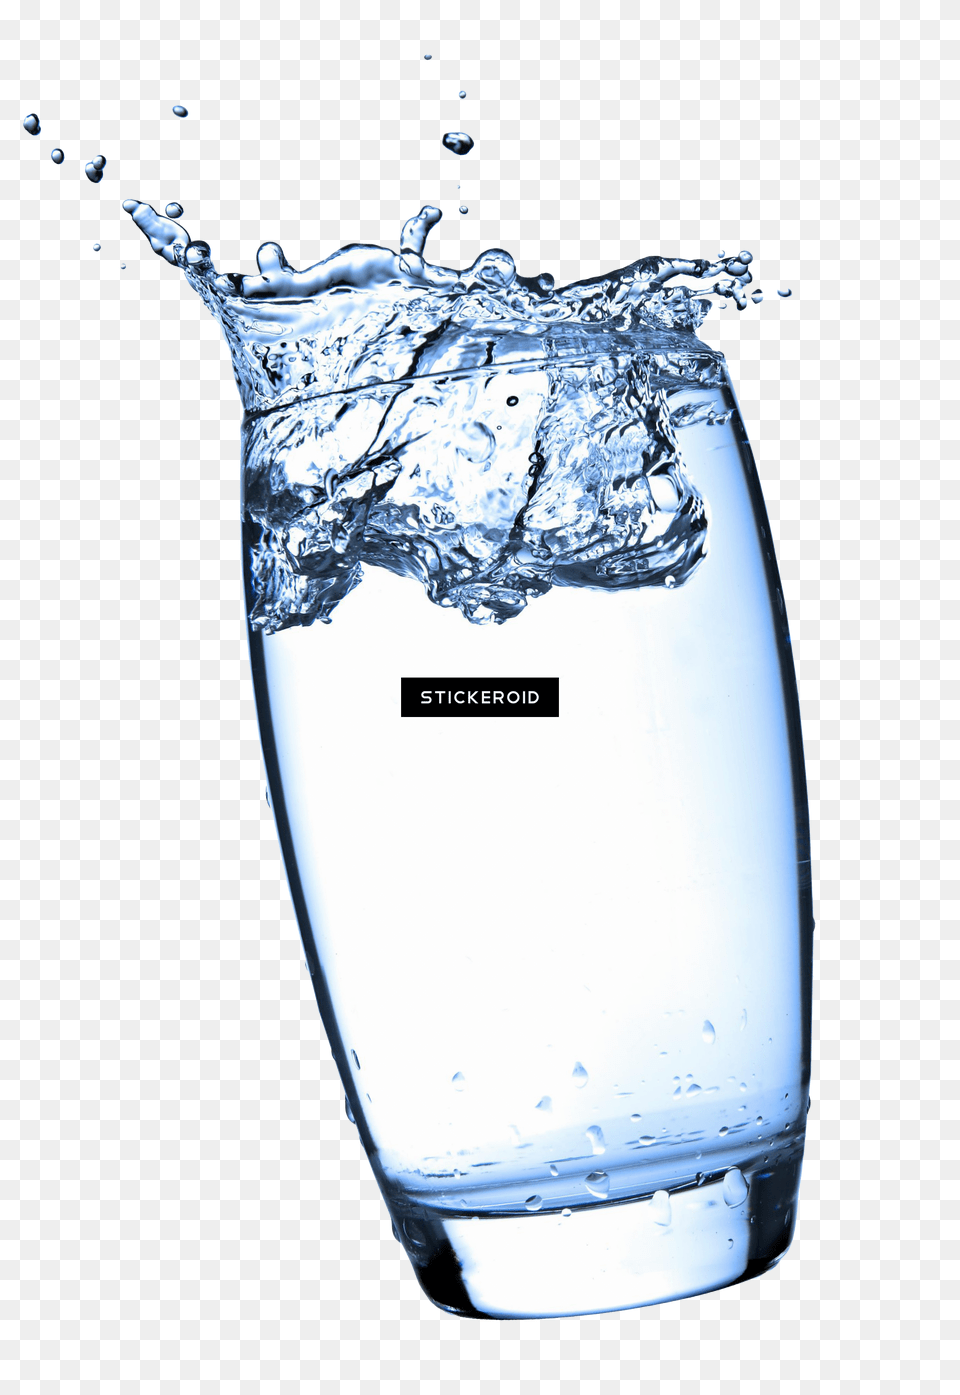 Glass Of Water Hd Transparent Background Water Glass Transparent, Bottle Png Image